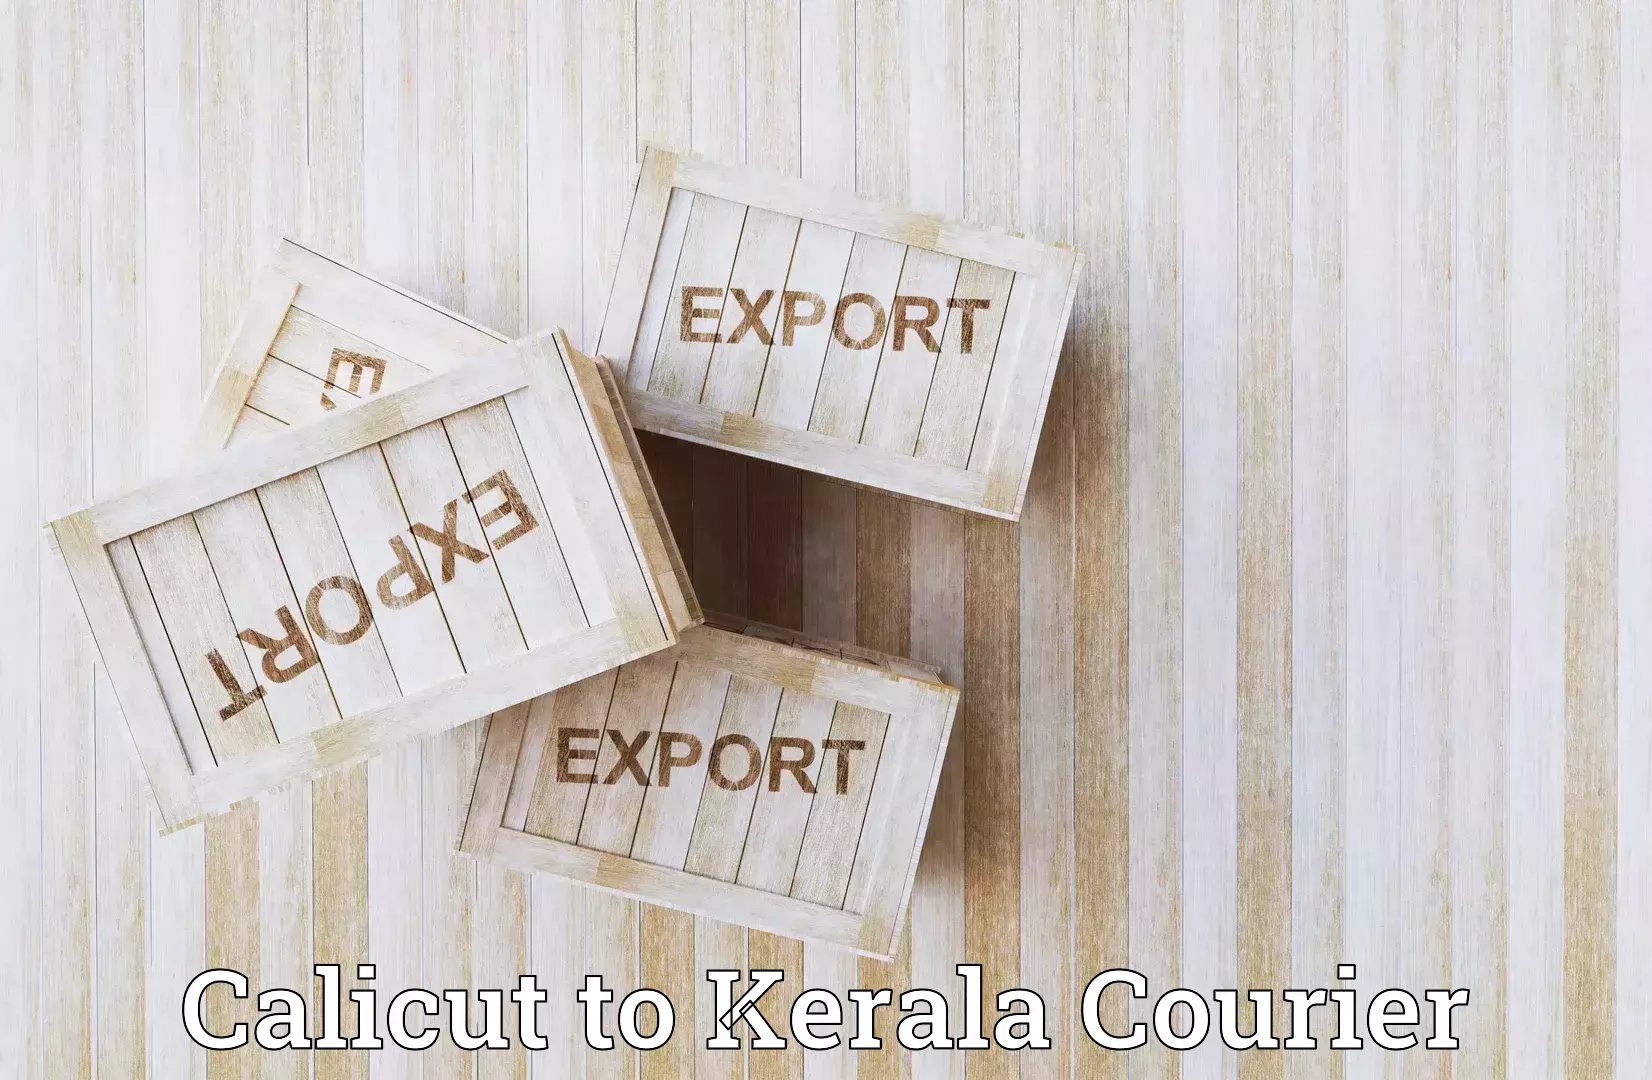 End-to-end delivery Calicut to Kerala